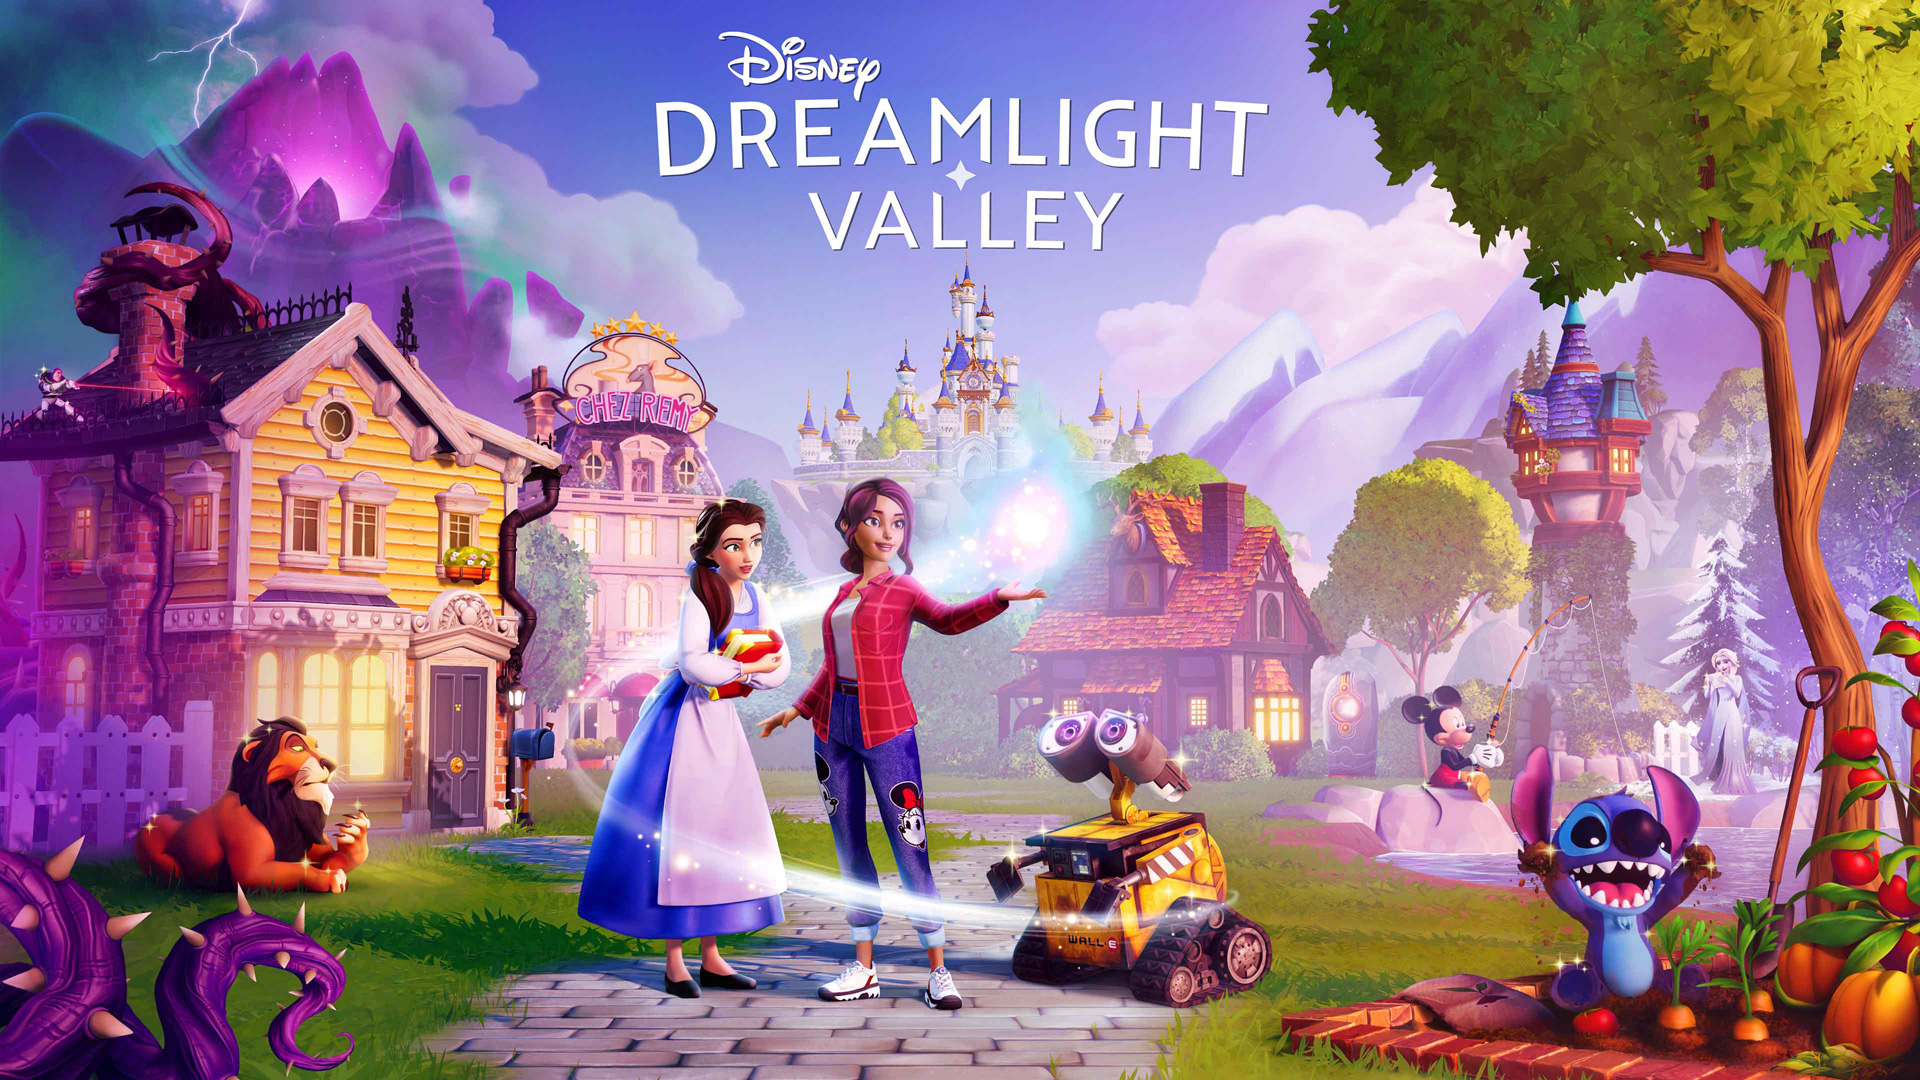 Disney Dreamlight Valley how to get rid of stumps?